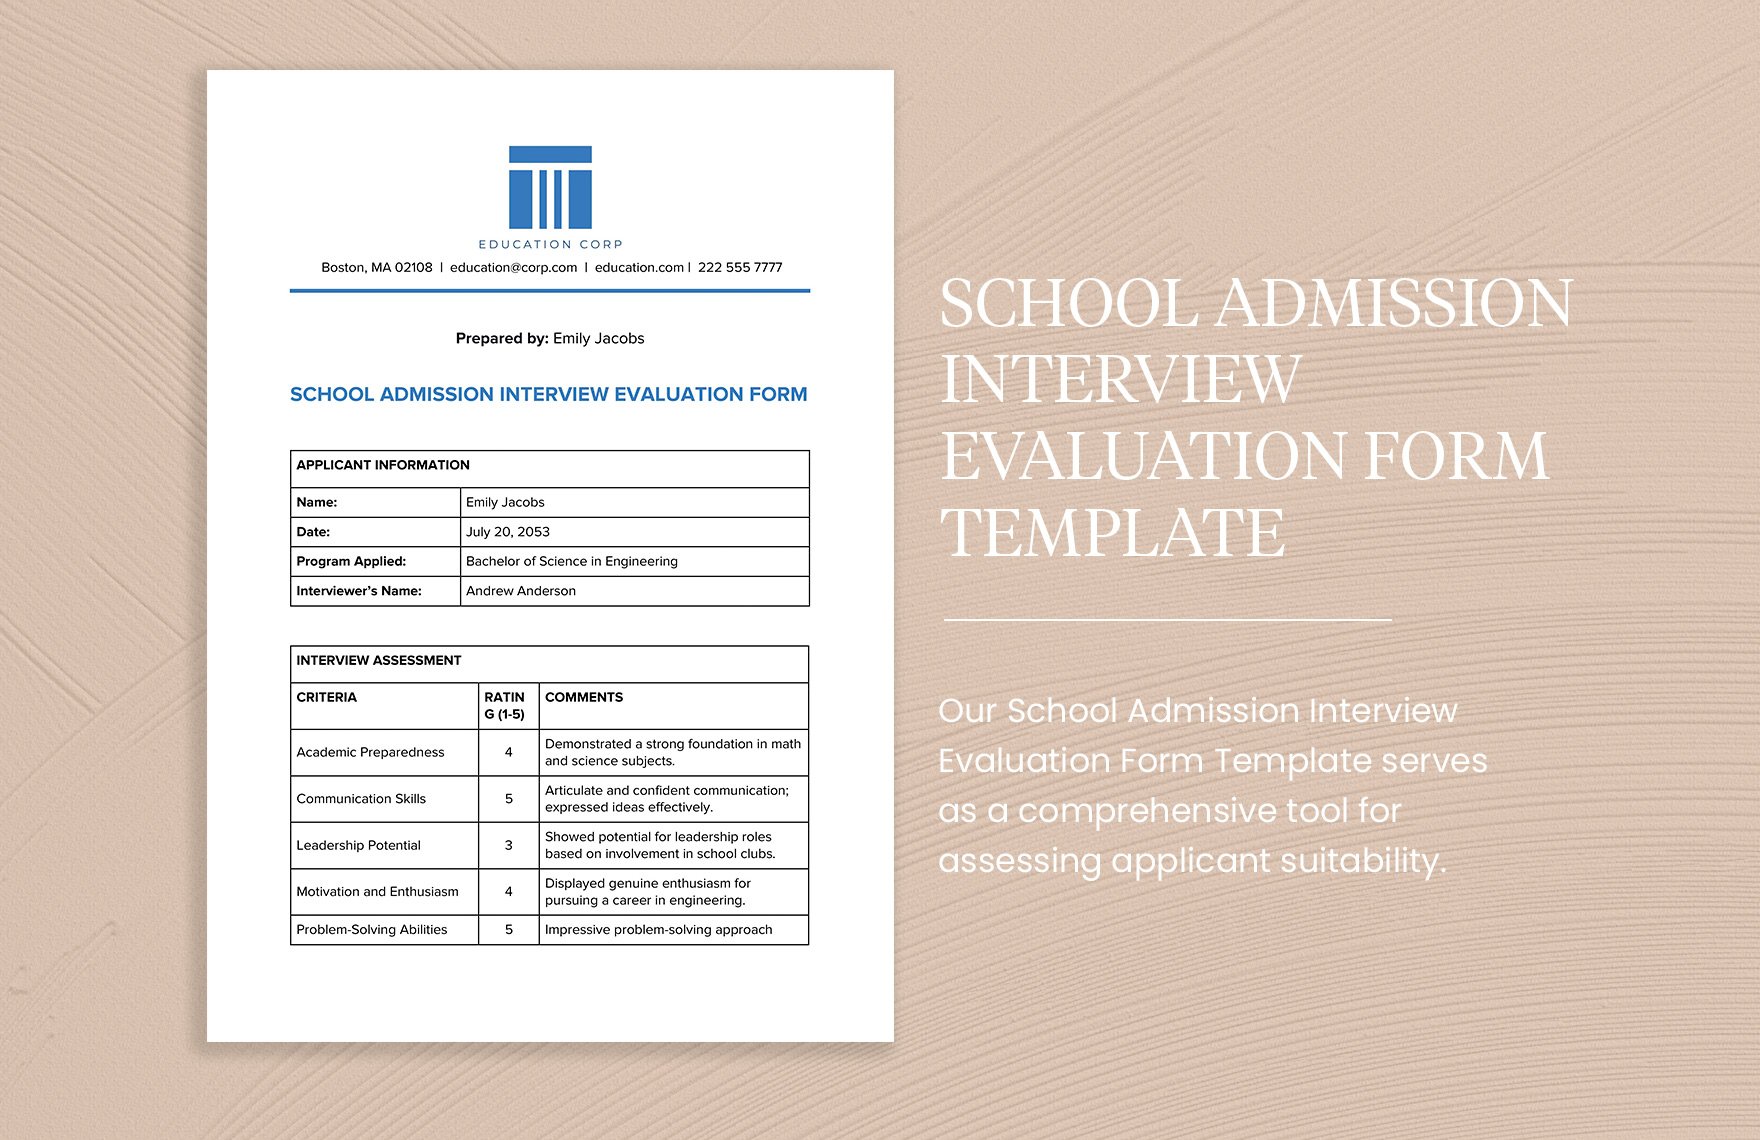 School Admission Interview Evaluation Form Template